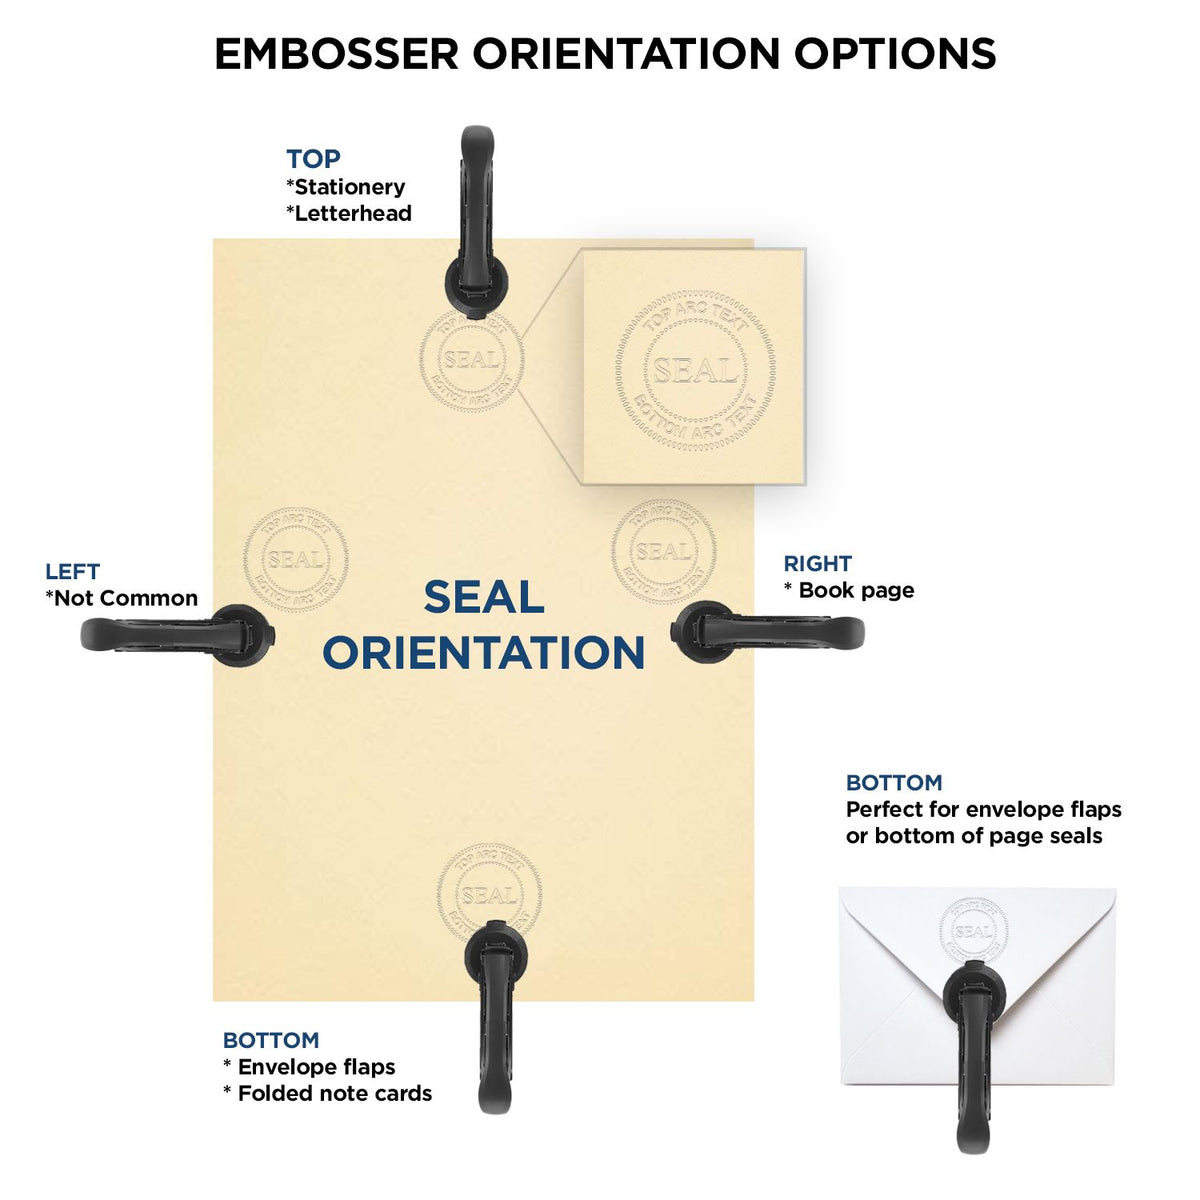 An infographic for the Heavy Duty Cast Iron Ohio Geologist Seal Embosser showing embosser orientation, this is showing examples of a top, bottom, right and left insert.